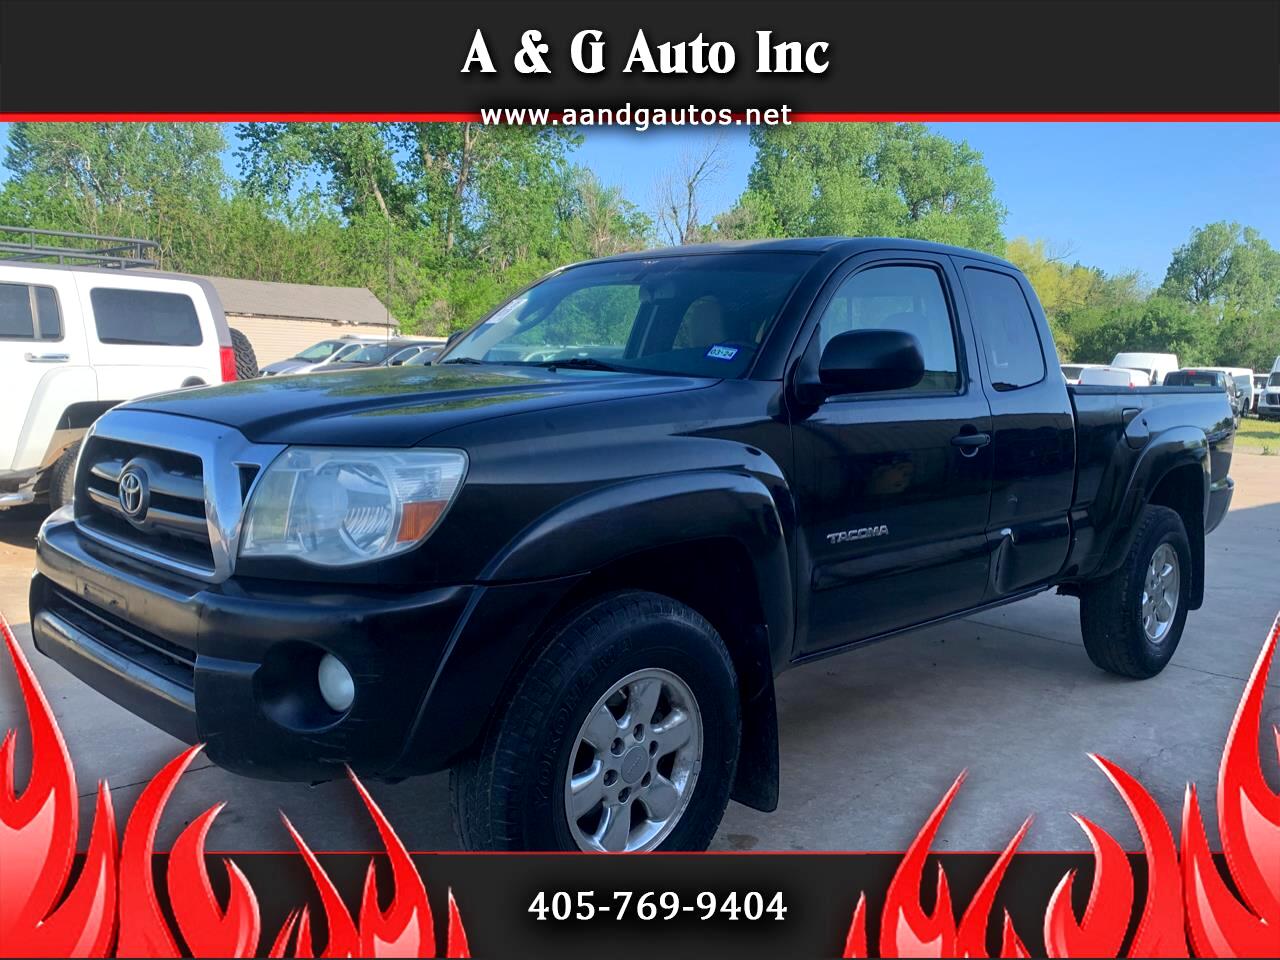 2010 Toyota Tacoma for sale in Oklahoma City OK 73141 by A & G Auto Inc